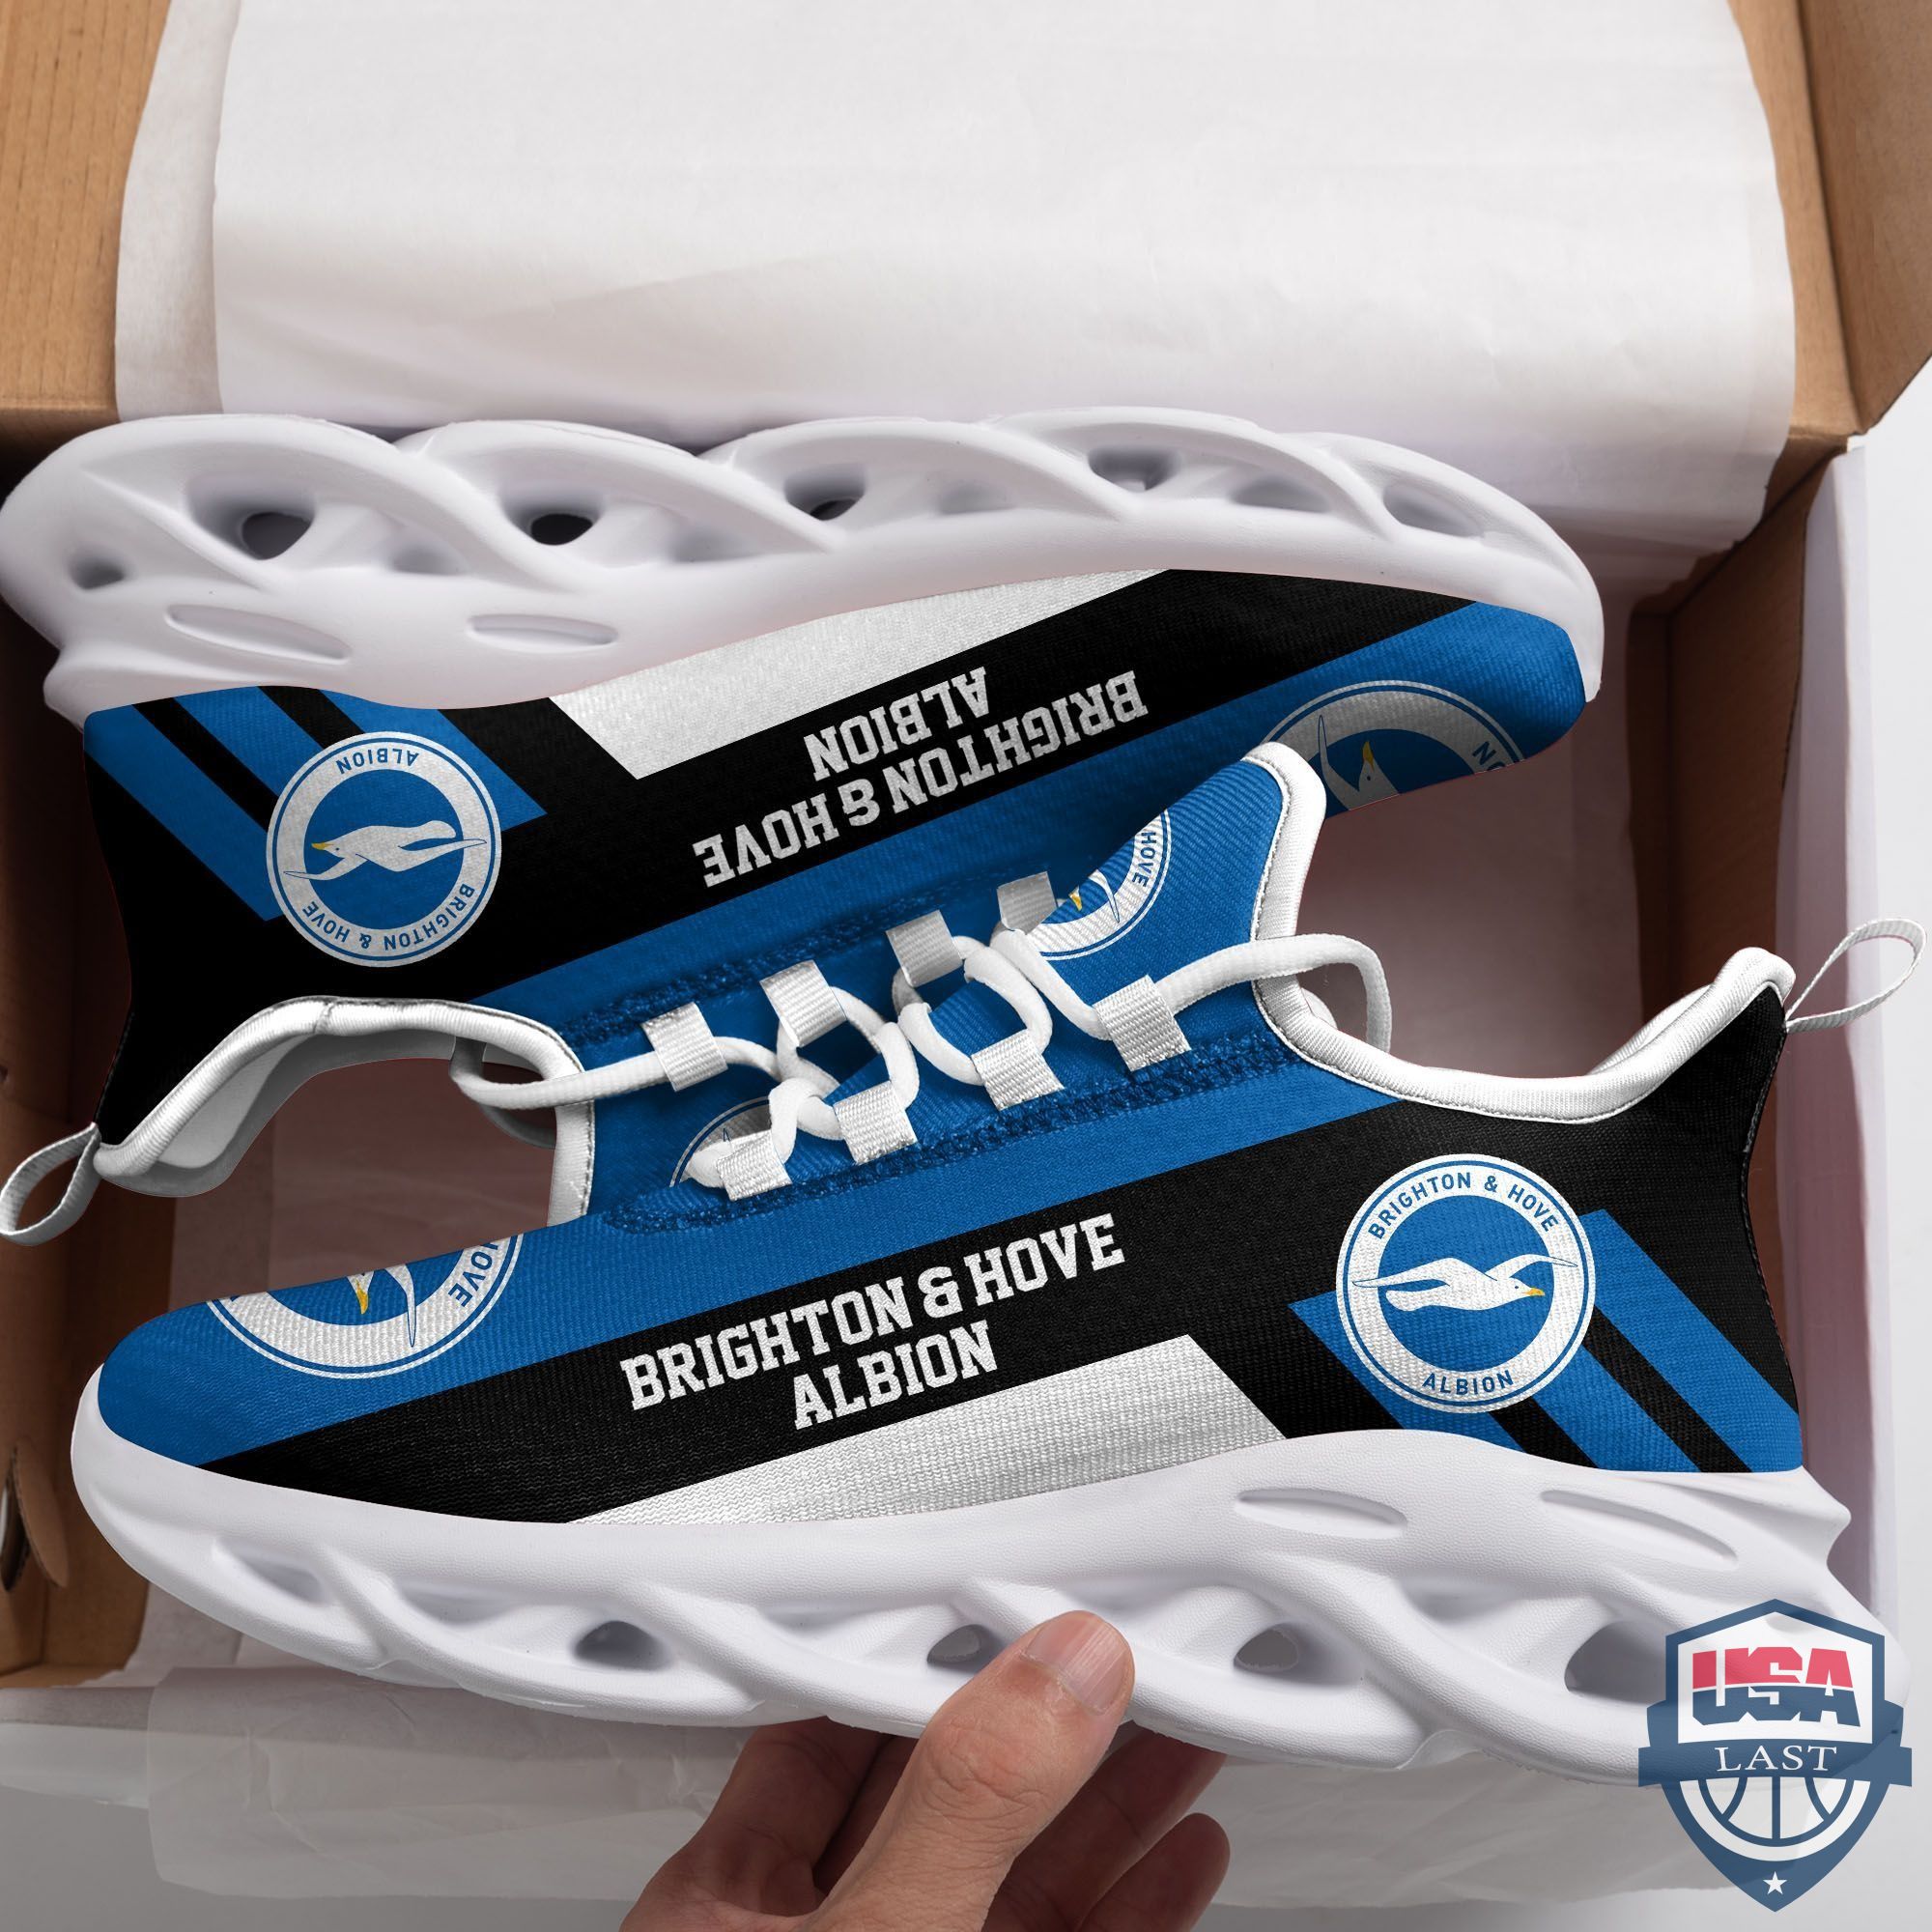 Brighton & Hove Albion FC Max Soul Sneakers Running Sports Shoes